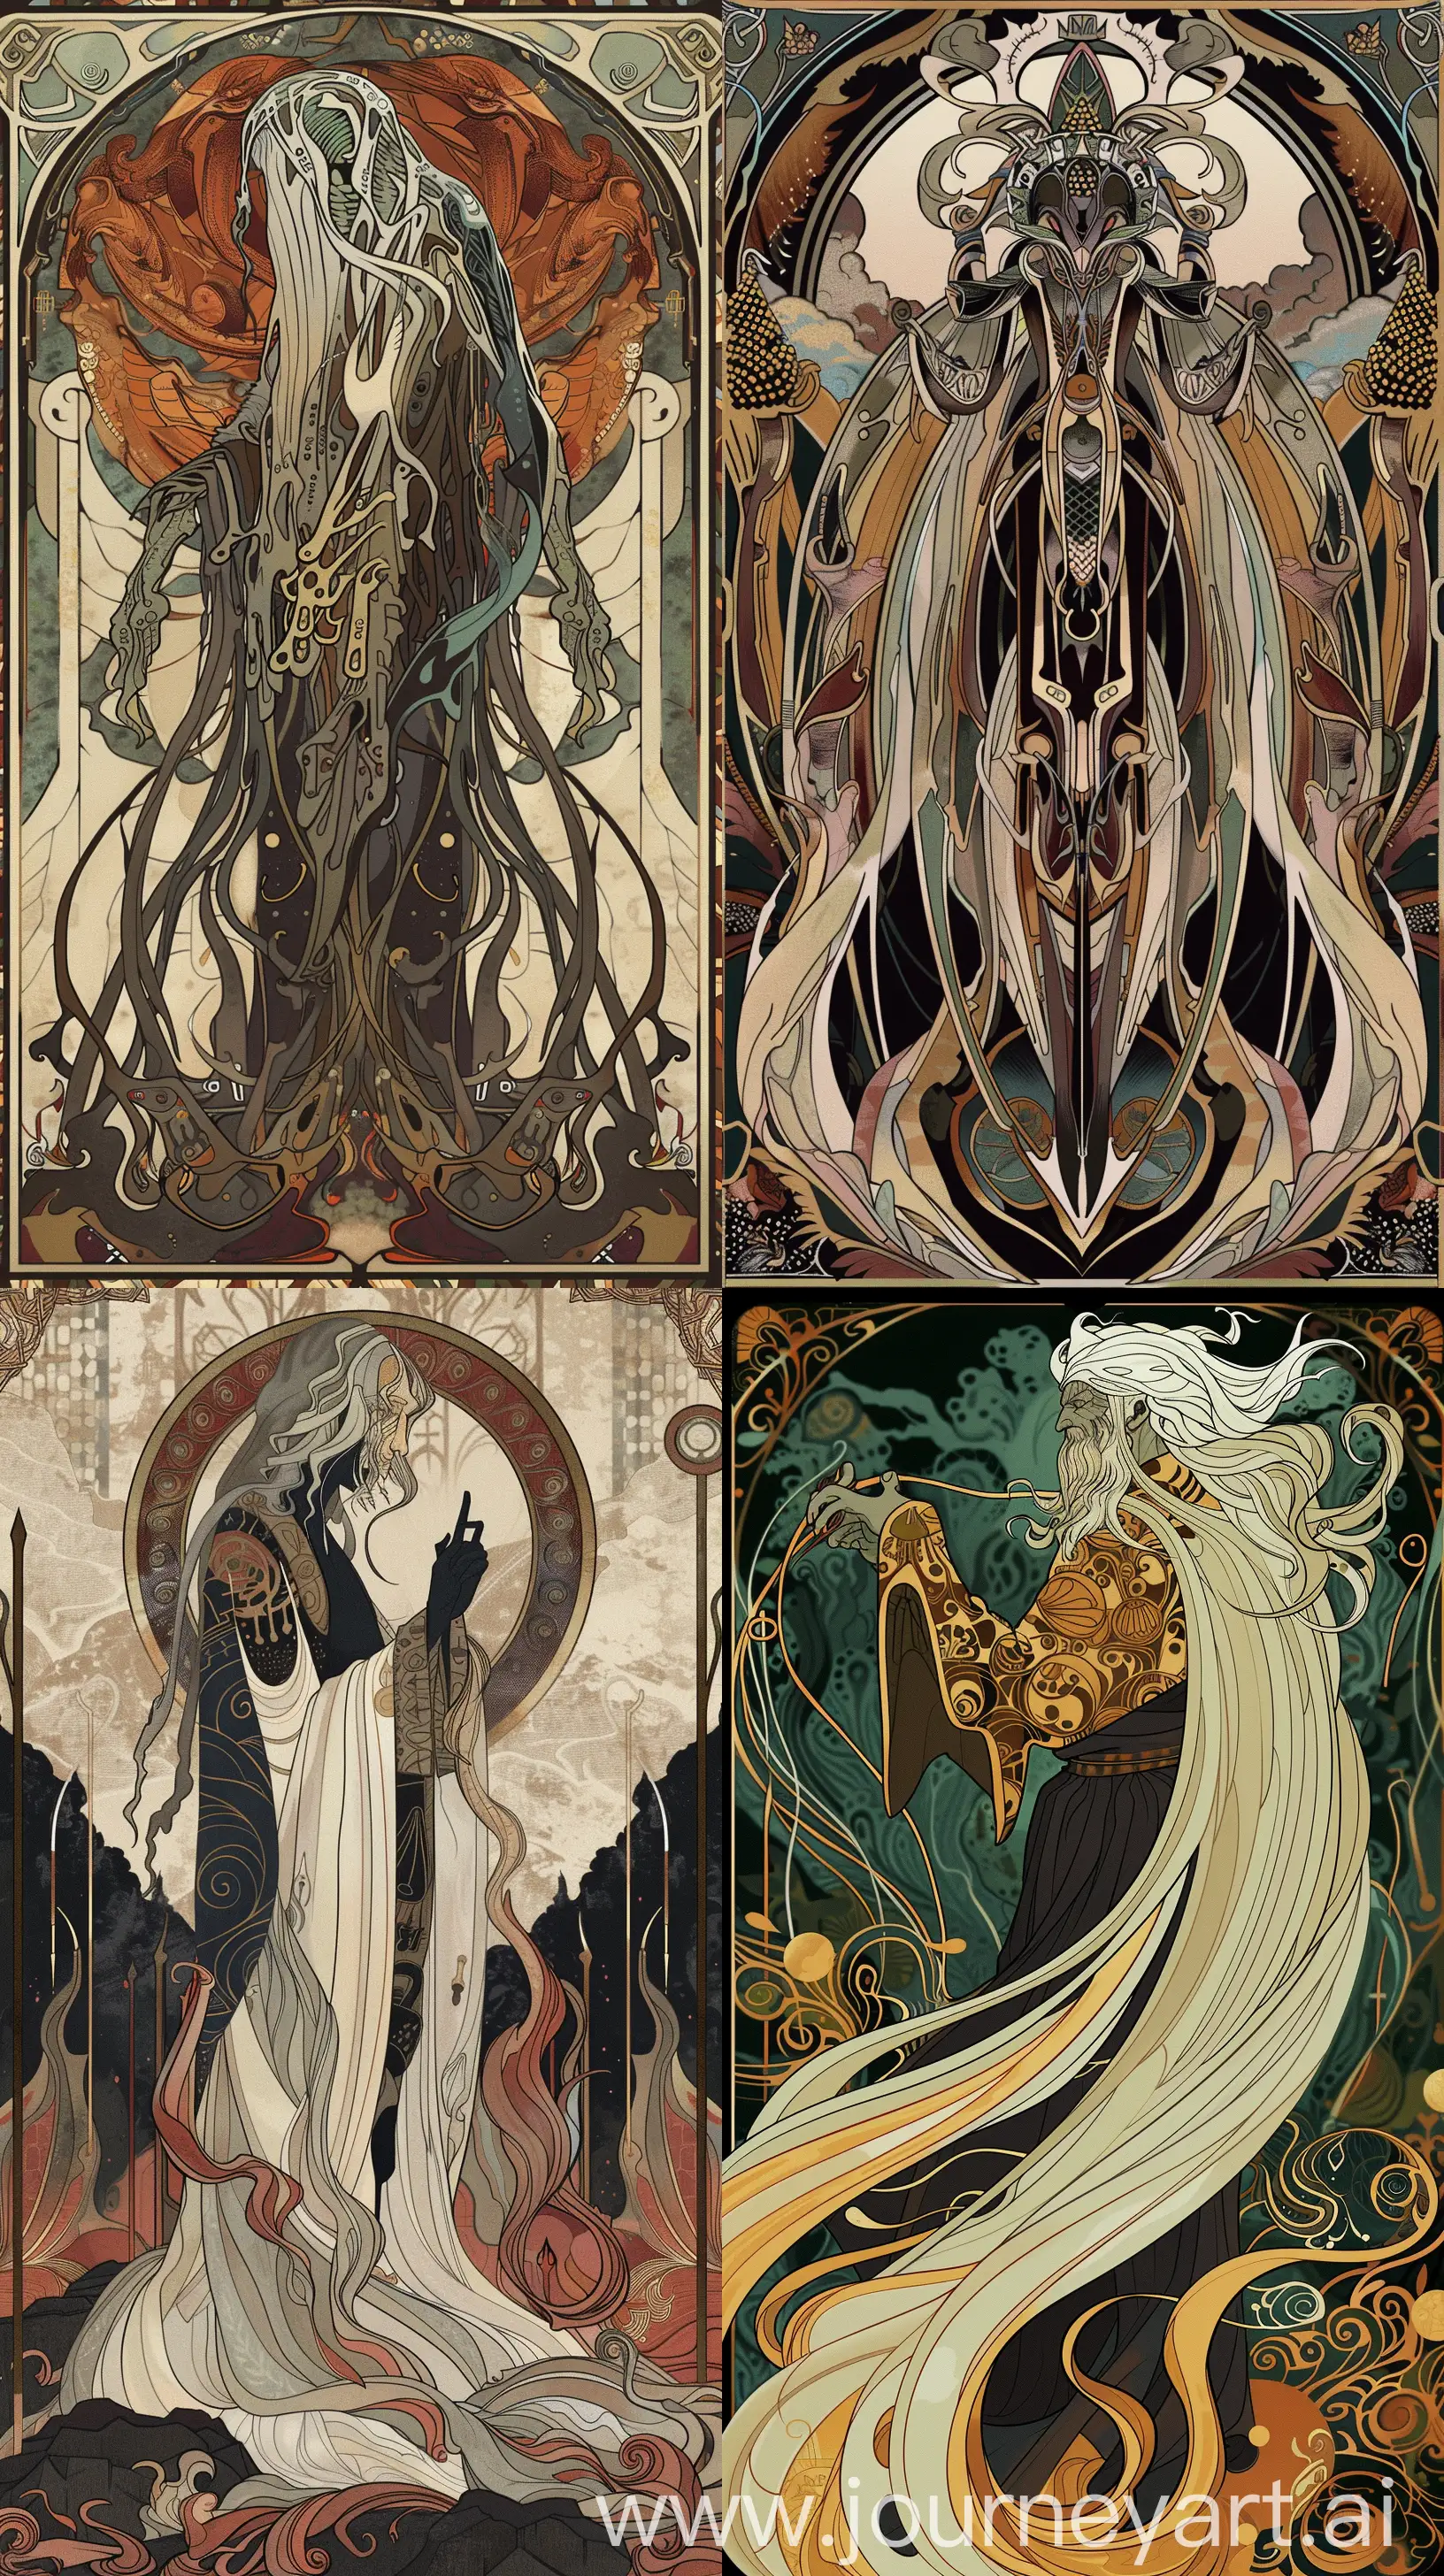 Create an Art Nouveau-inspired interpretation of a Horseman of the Apocalypse, featuring elegant, flowing lines and organic forms. The figure should embody the essence of their domain, be it war, famine, pestilence, or death, with intricate patterns and a harmonious color palette. The background should be a lavish, stylized landscape that enhances the thematic elements of the horseman, all in a stunning 8K UHD resolution suitable for a phone wallpaper. --ar 9:16